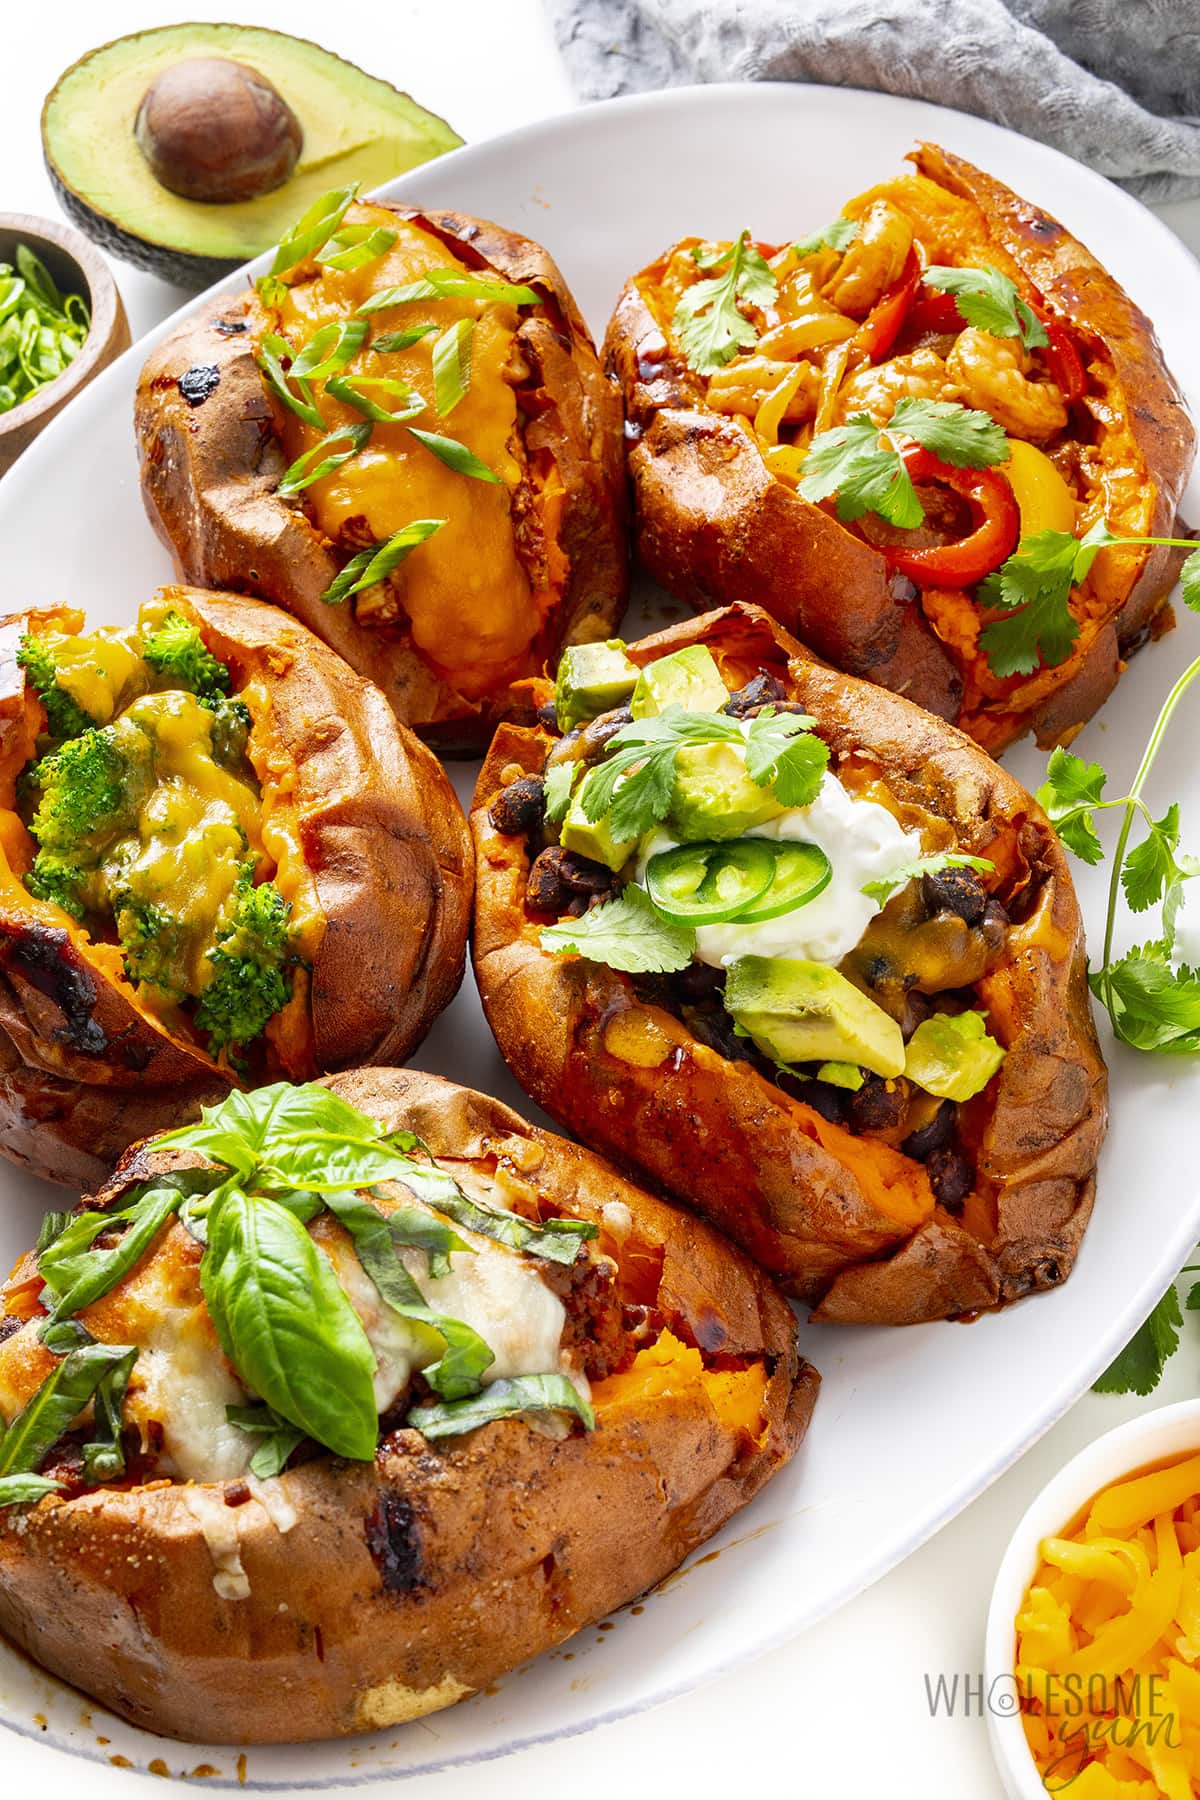 Stuffed sweet potatoes with 5 types of fillings on a platter.